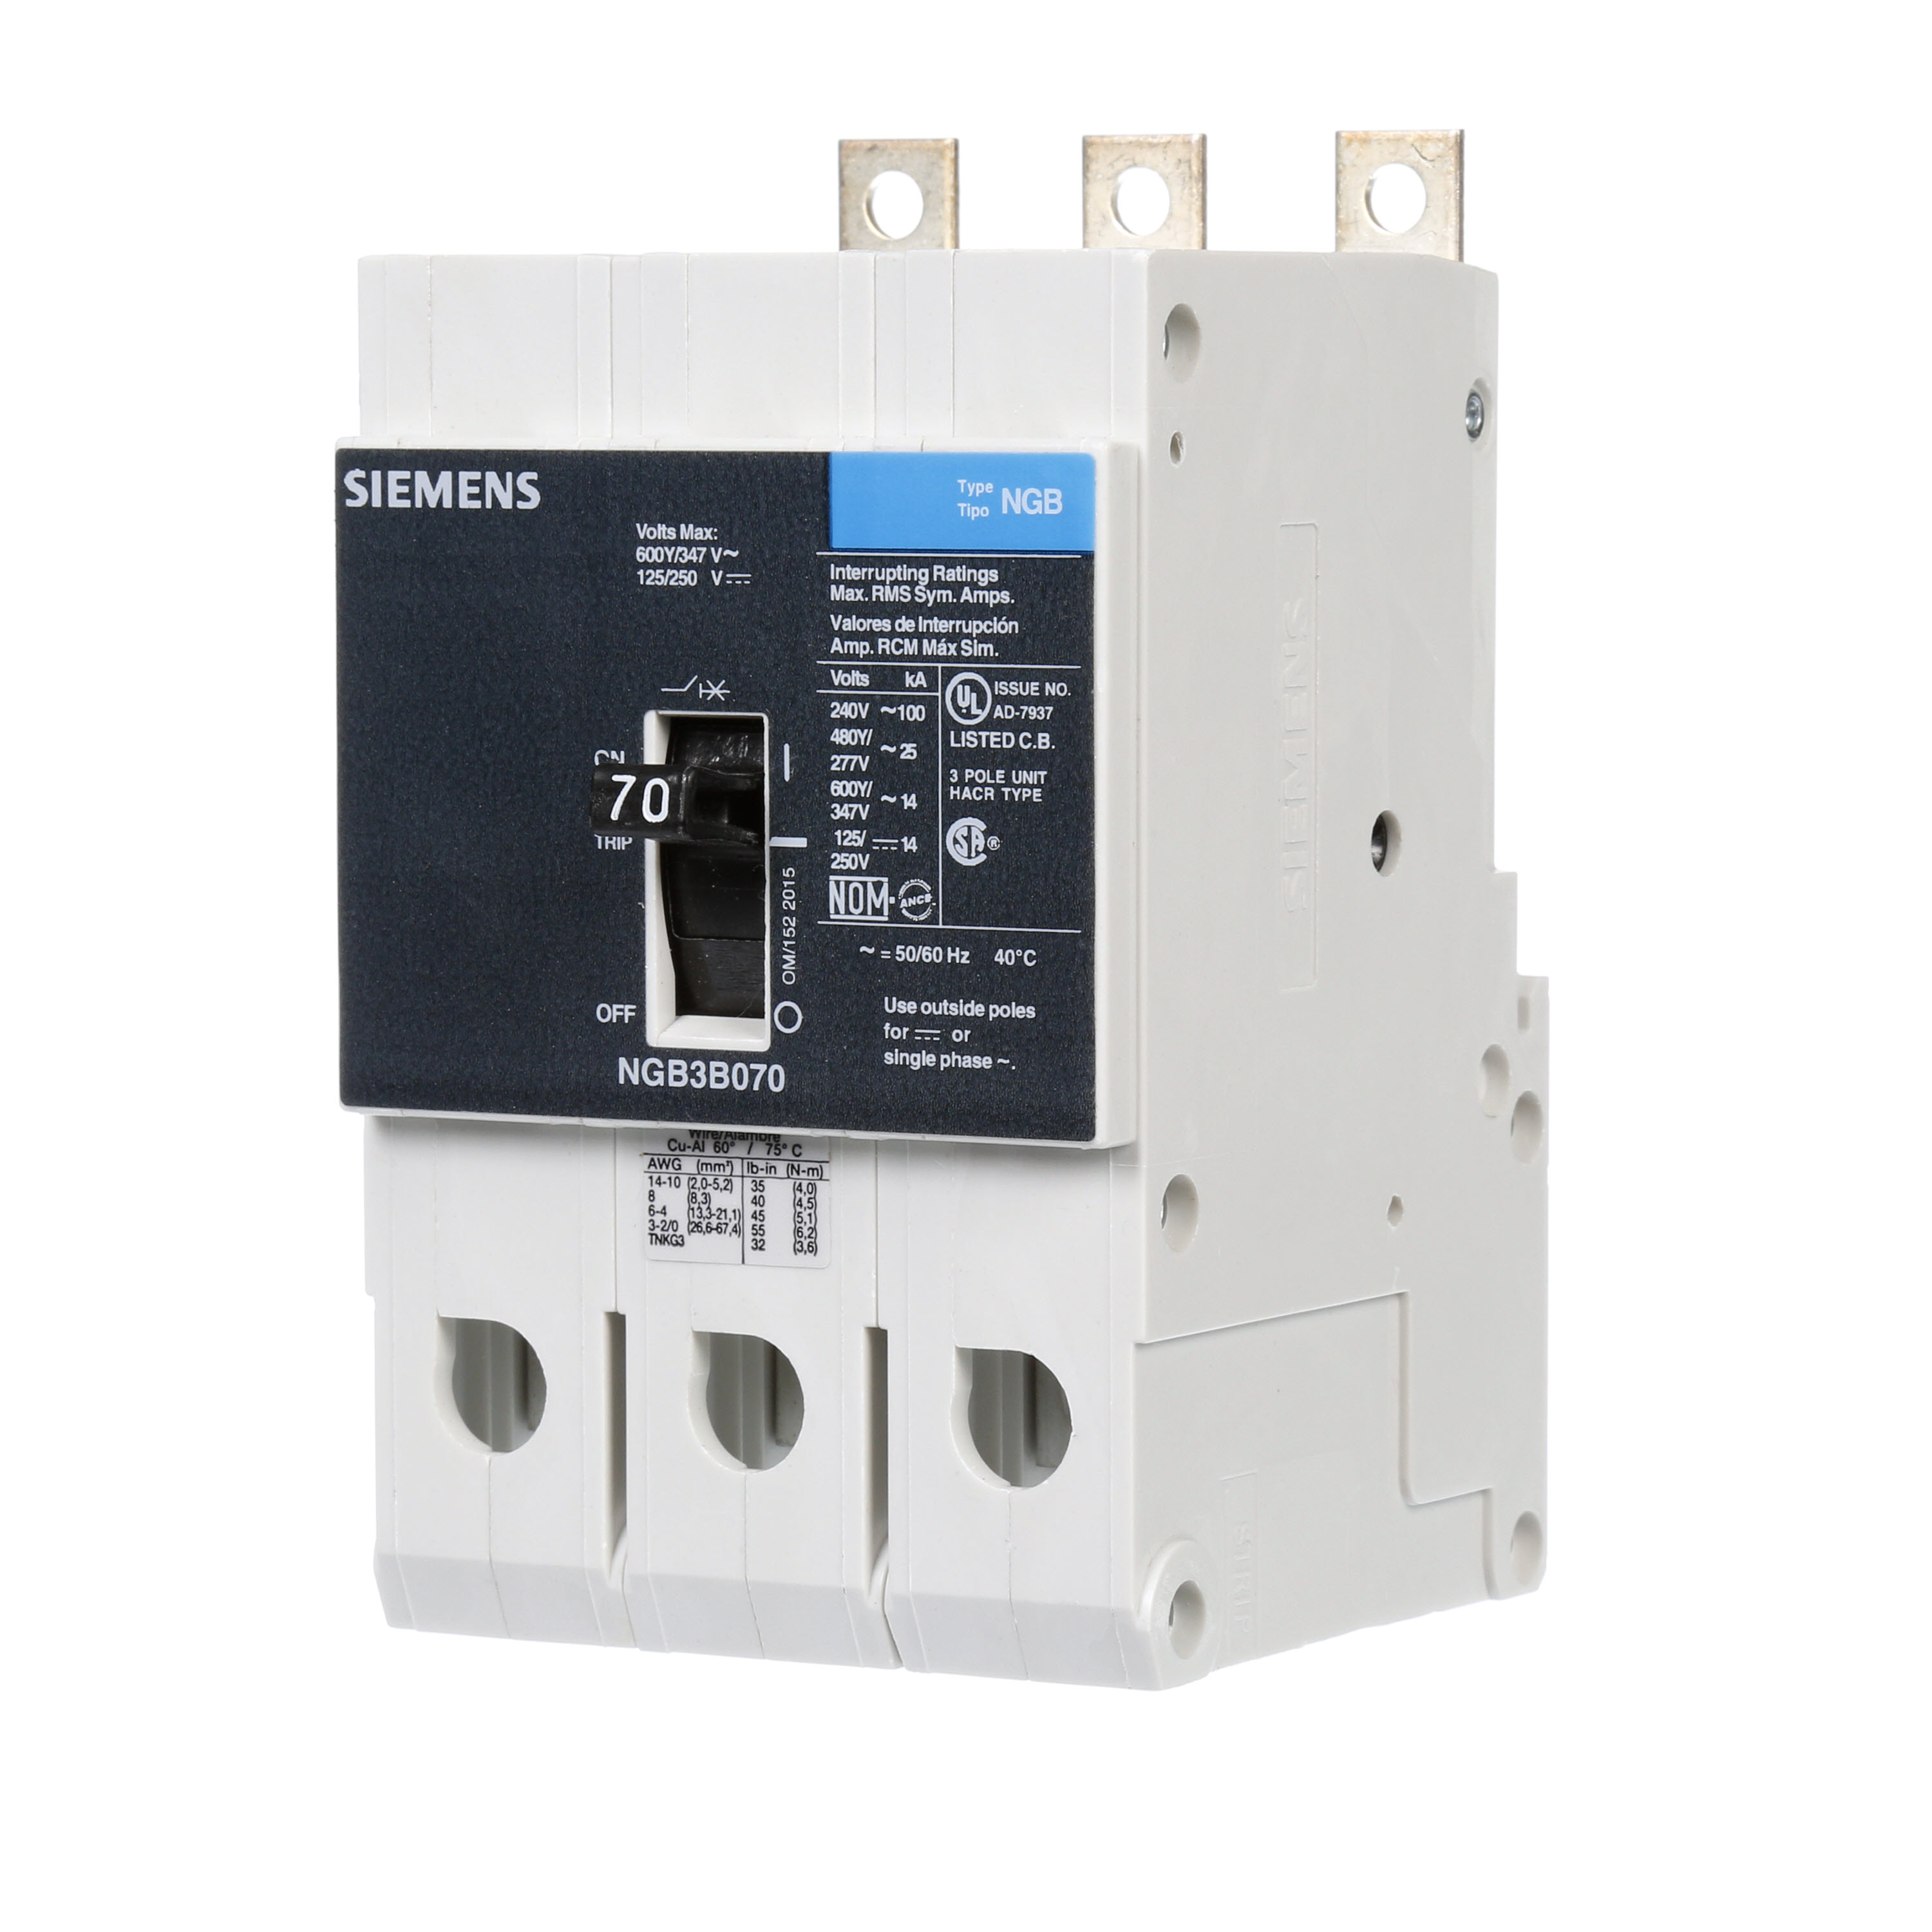 SIEMENS LOW VOLTAGE PANELBOARD MOUNT G FRAME CIRCUIT BREAKER WITH THERMAL - MAGNETIC TRIP. UL LISTED NGB FRAME WITH STANDARD BREAKING CAPACITY. 70A 3-POLE (14KAIC AT 600Y/347V) (25KAIC AT 480Y/277V). SPECIAL FEATURES MOUNTS ON PANELBOARD, NO LUGS, VALUE PACK. DIMENSIONS (W x H x D) IN 3 x 5.4 x 2.8.